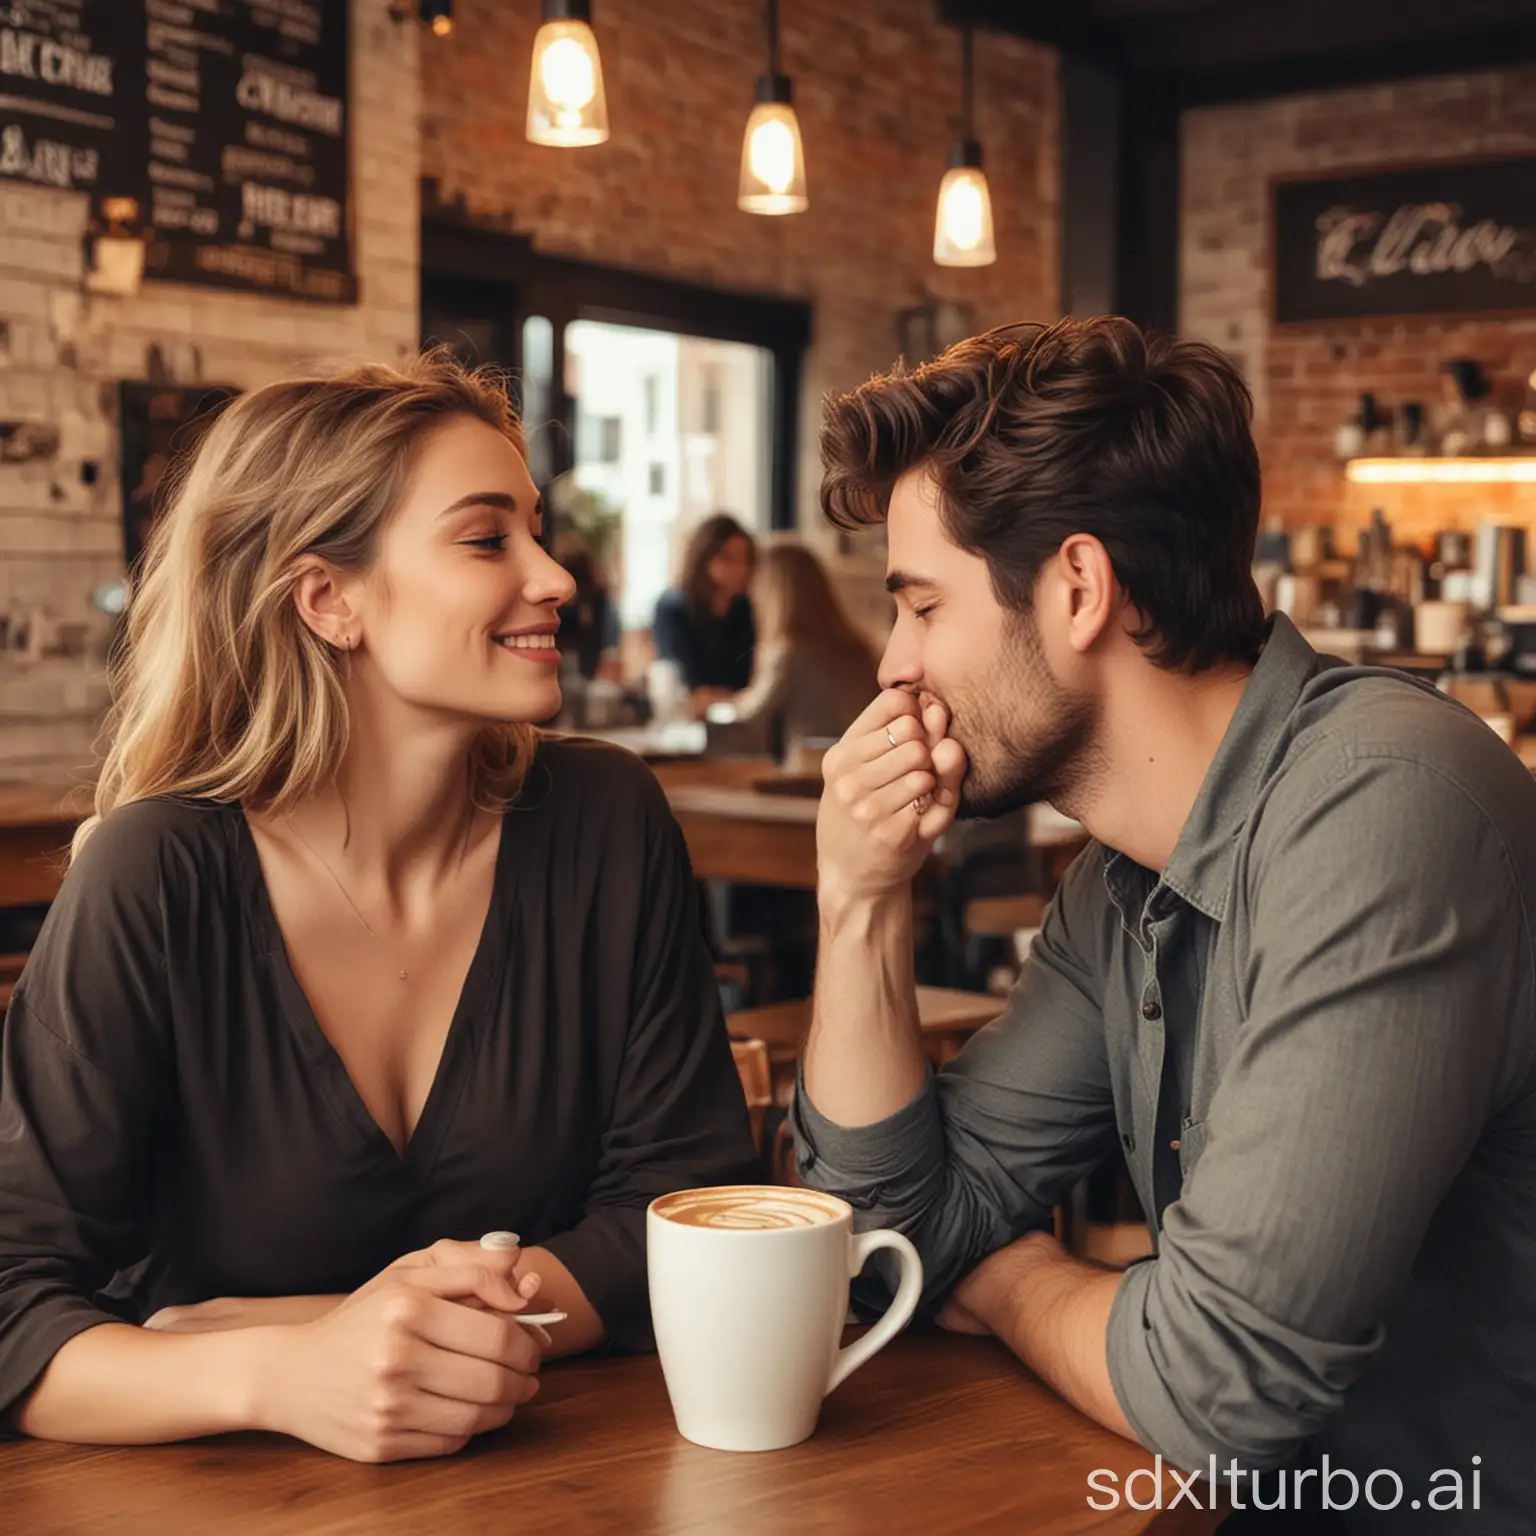 Romantic-Encounter-Man-Falling-in-Love-with-a-Beautiful-Woman-in-a-Coffee-Shop